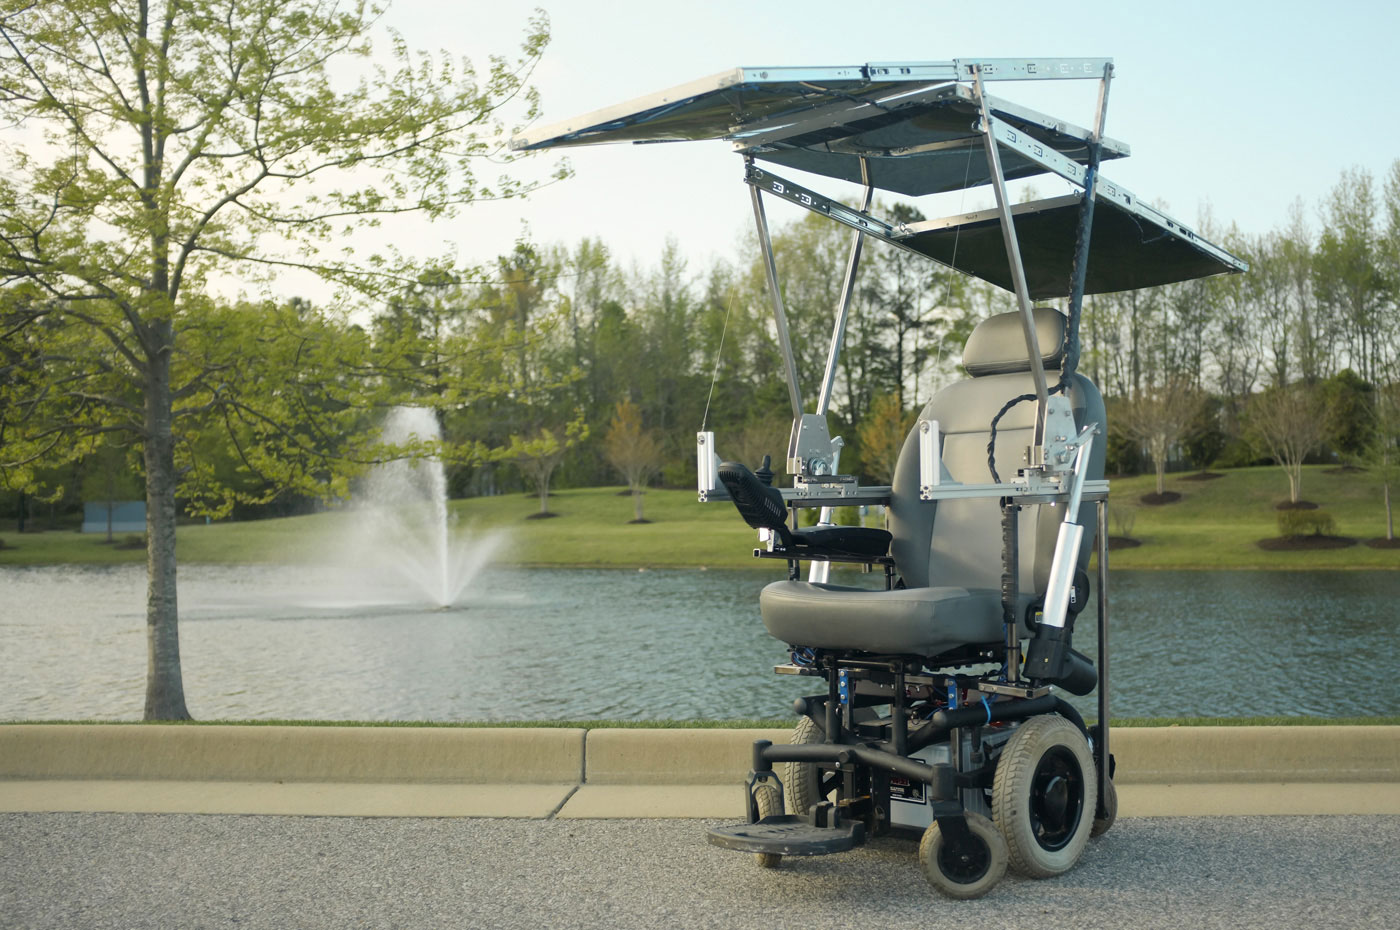 Solar Powered Wheelchair Design Complete With Smartphone Charger